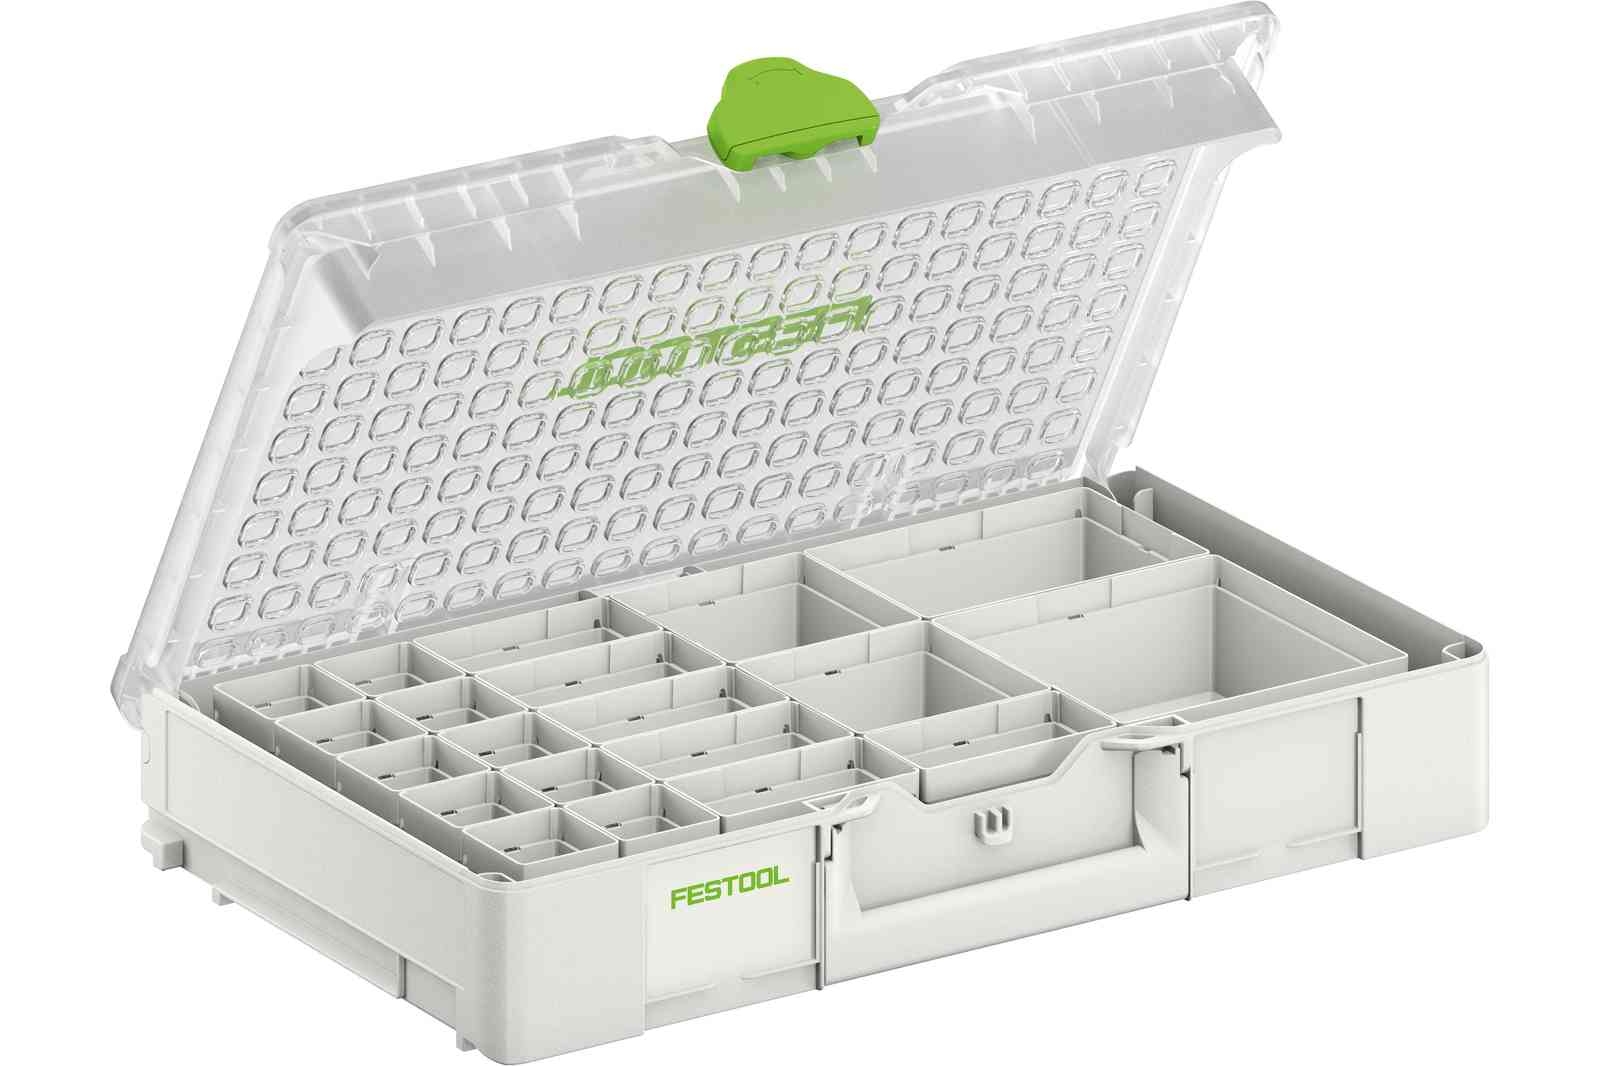 Tanos Systainer T-LOC SYS 1 parts organizer insert ( Festool ) NEW